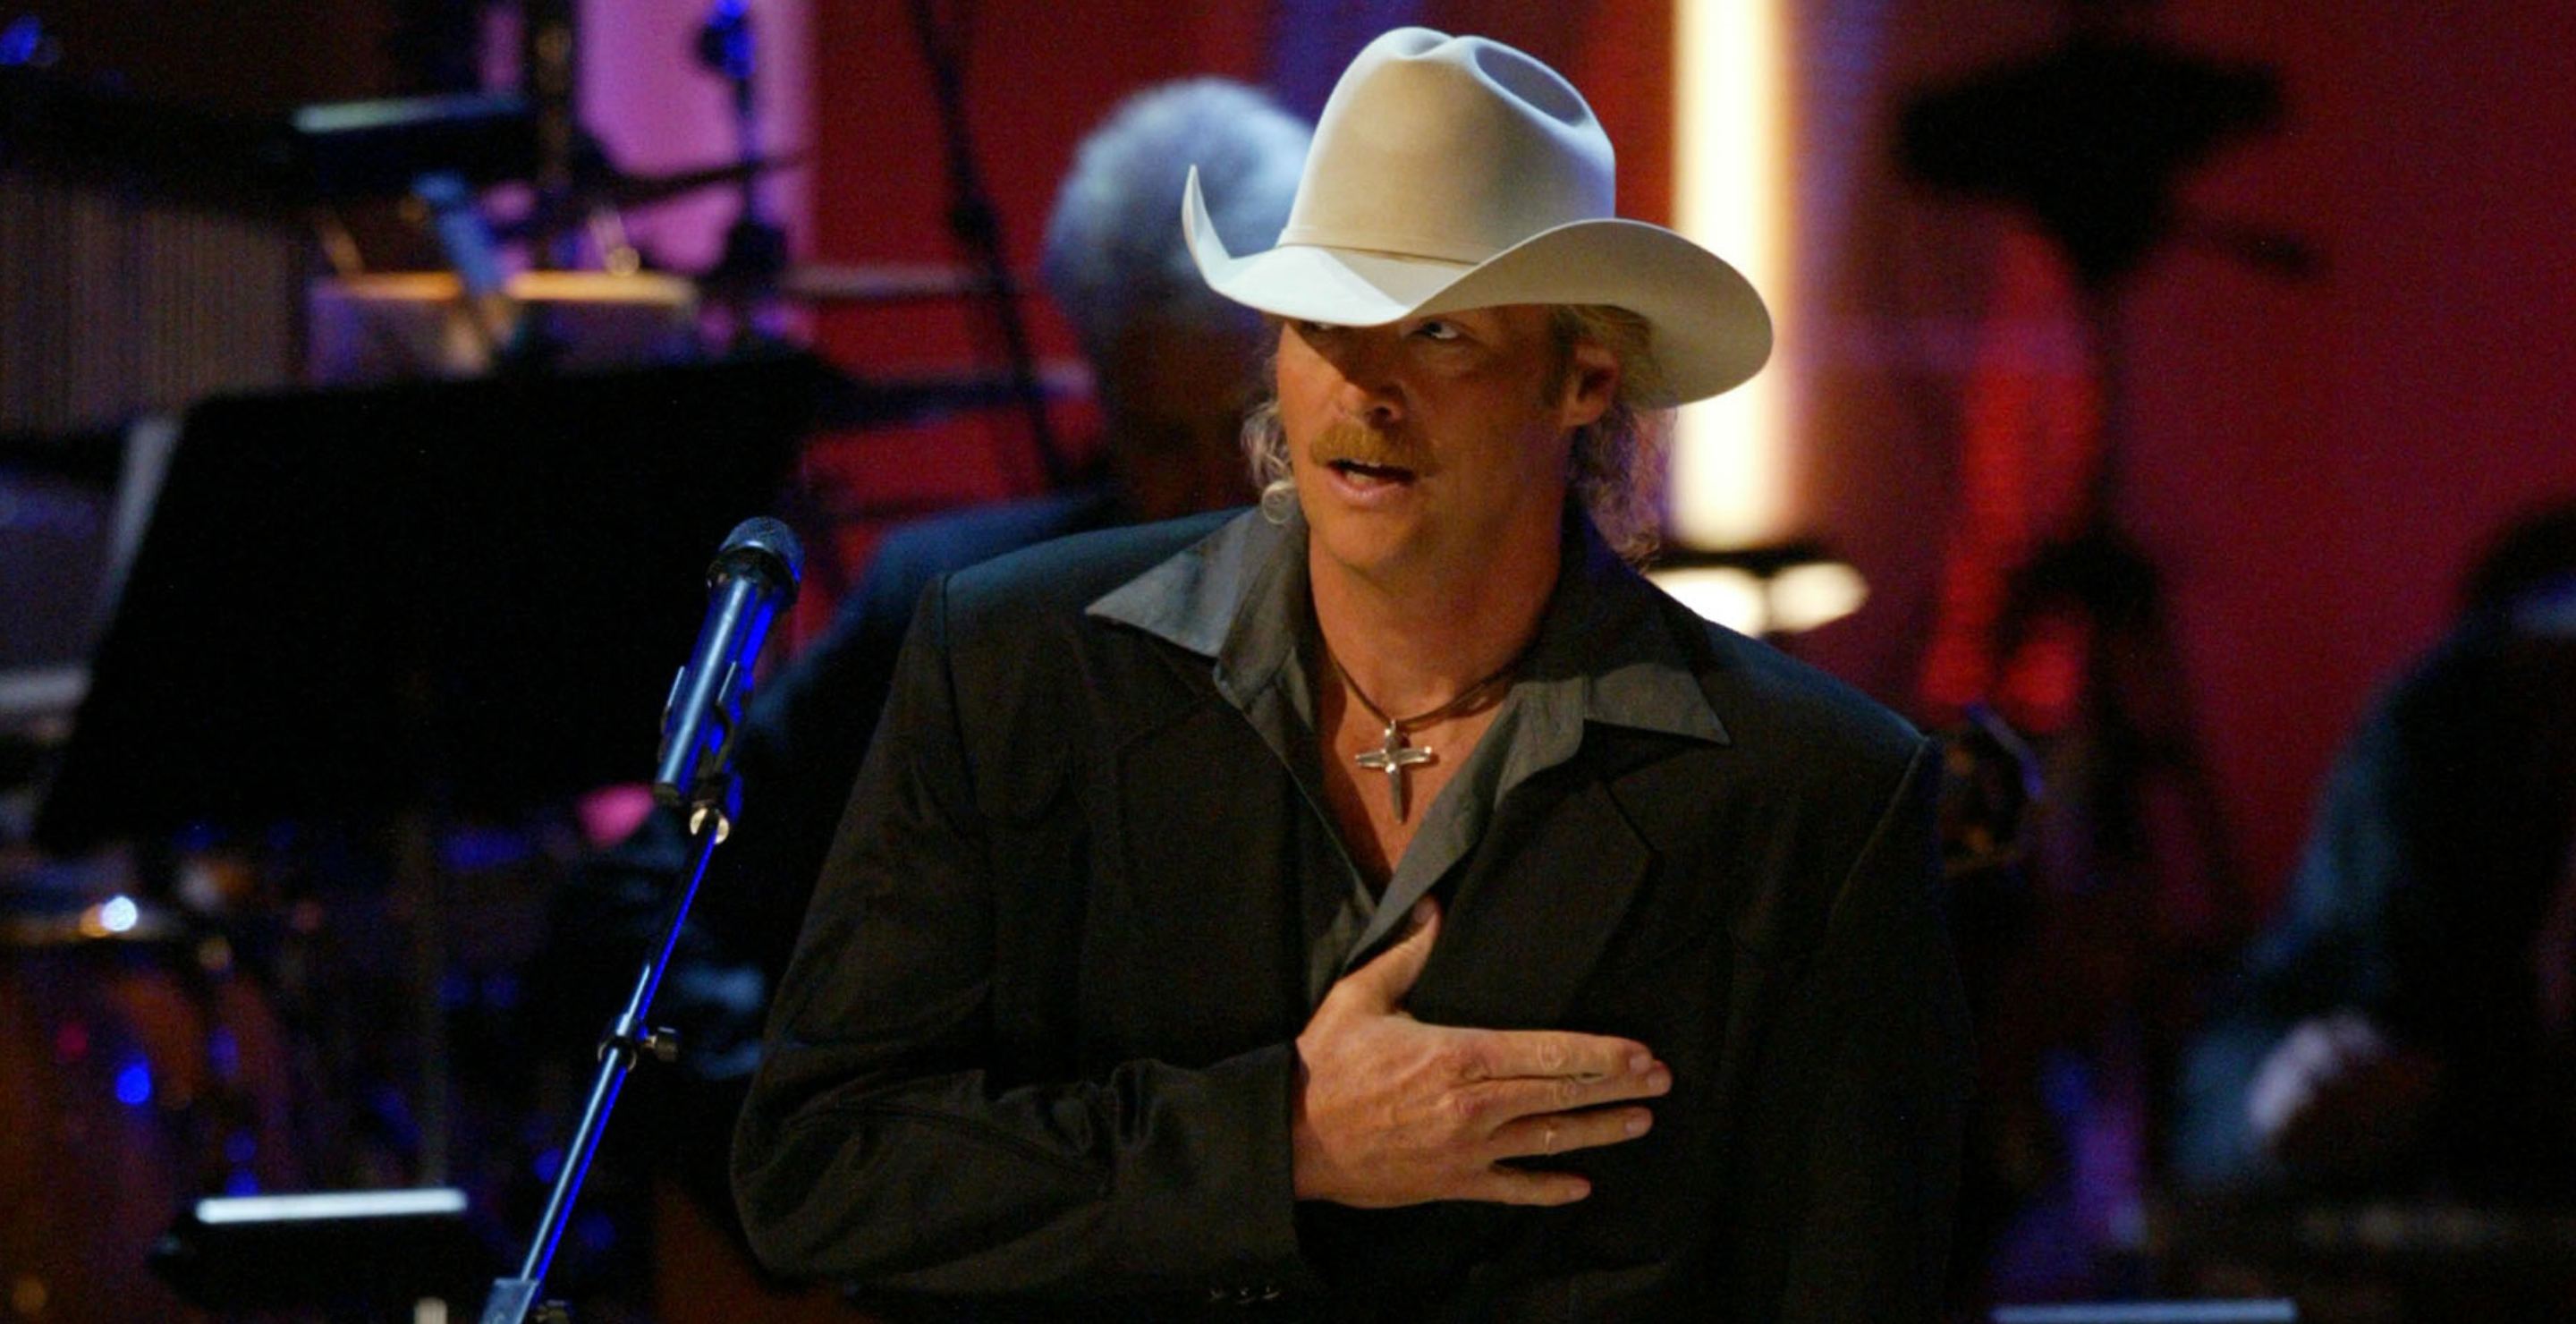 Alan Jackson performs on the "Concert for America" at the Kennedy Center in washington, DC, September 9, 2002. The show airs on NBC on Wednesday, September 11.